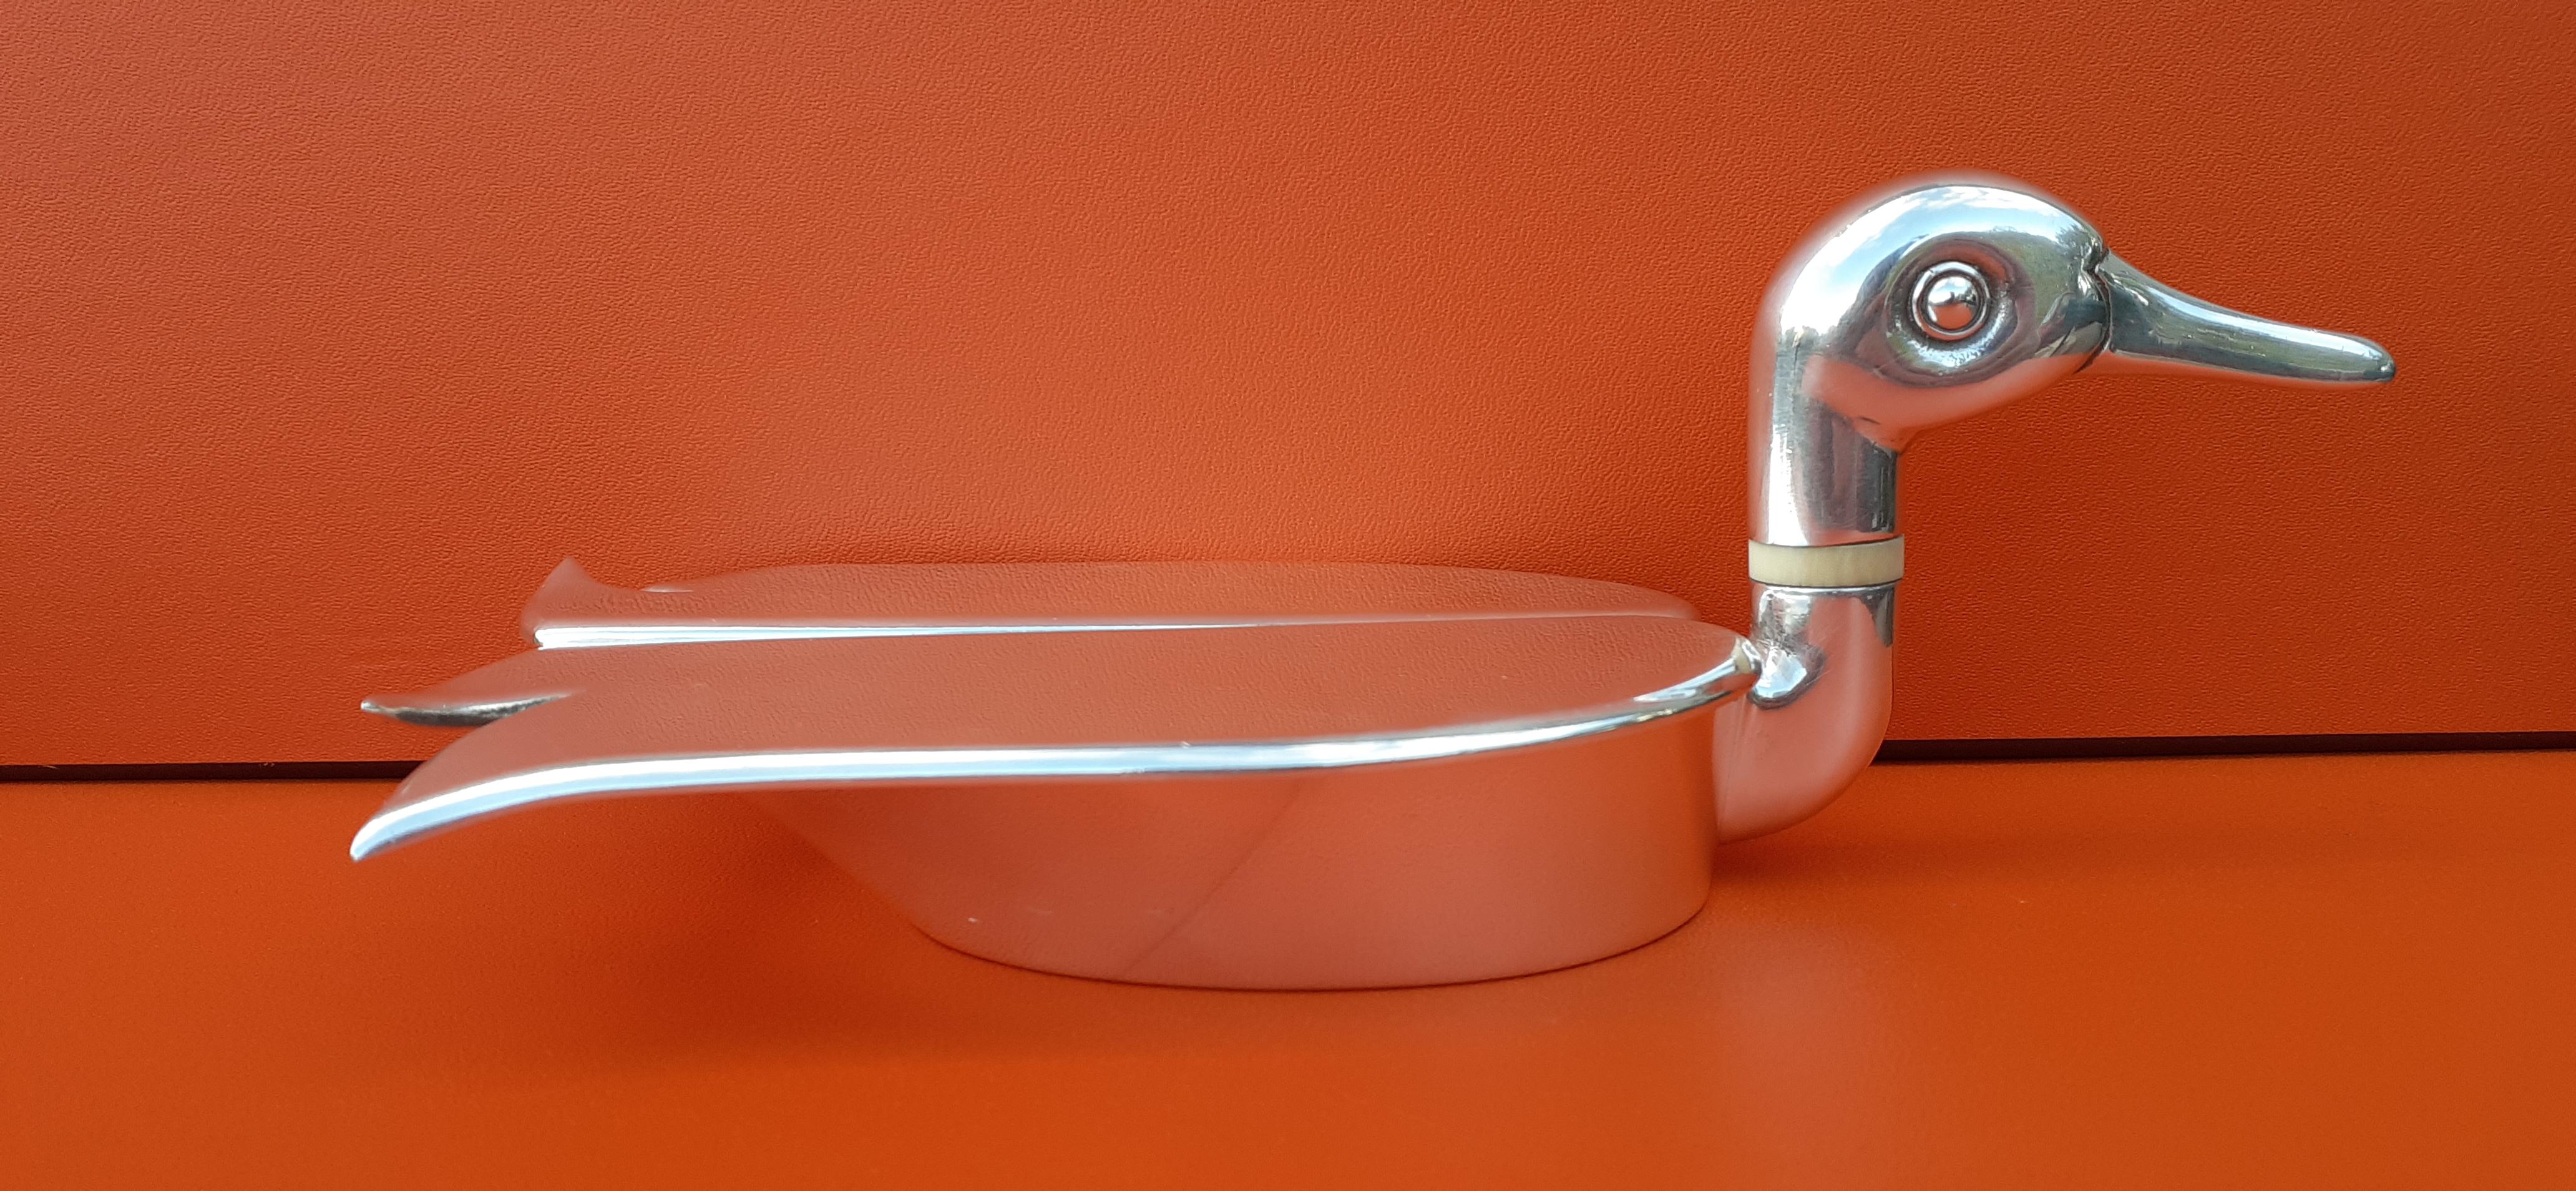 Exceptional Hermès Vintage Ashtray Change Tray Duck Shaped in Silver Tone Metal 10